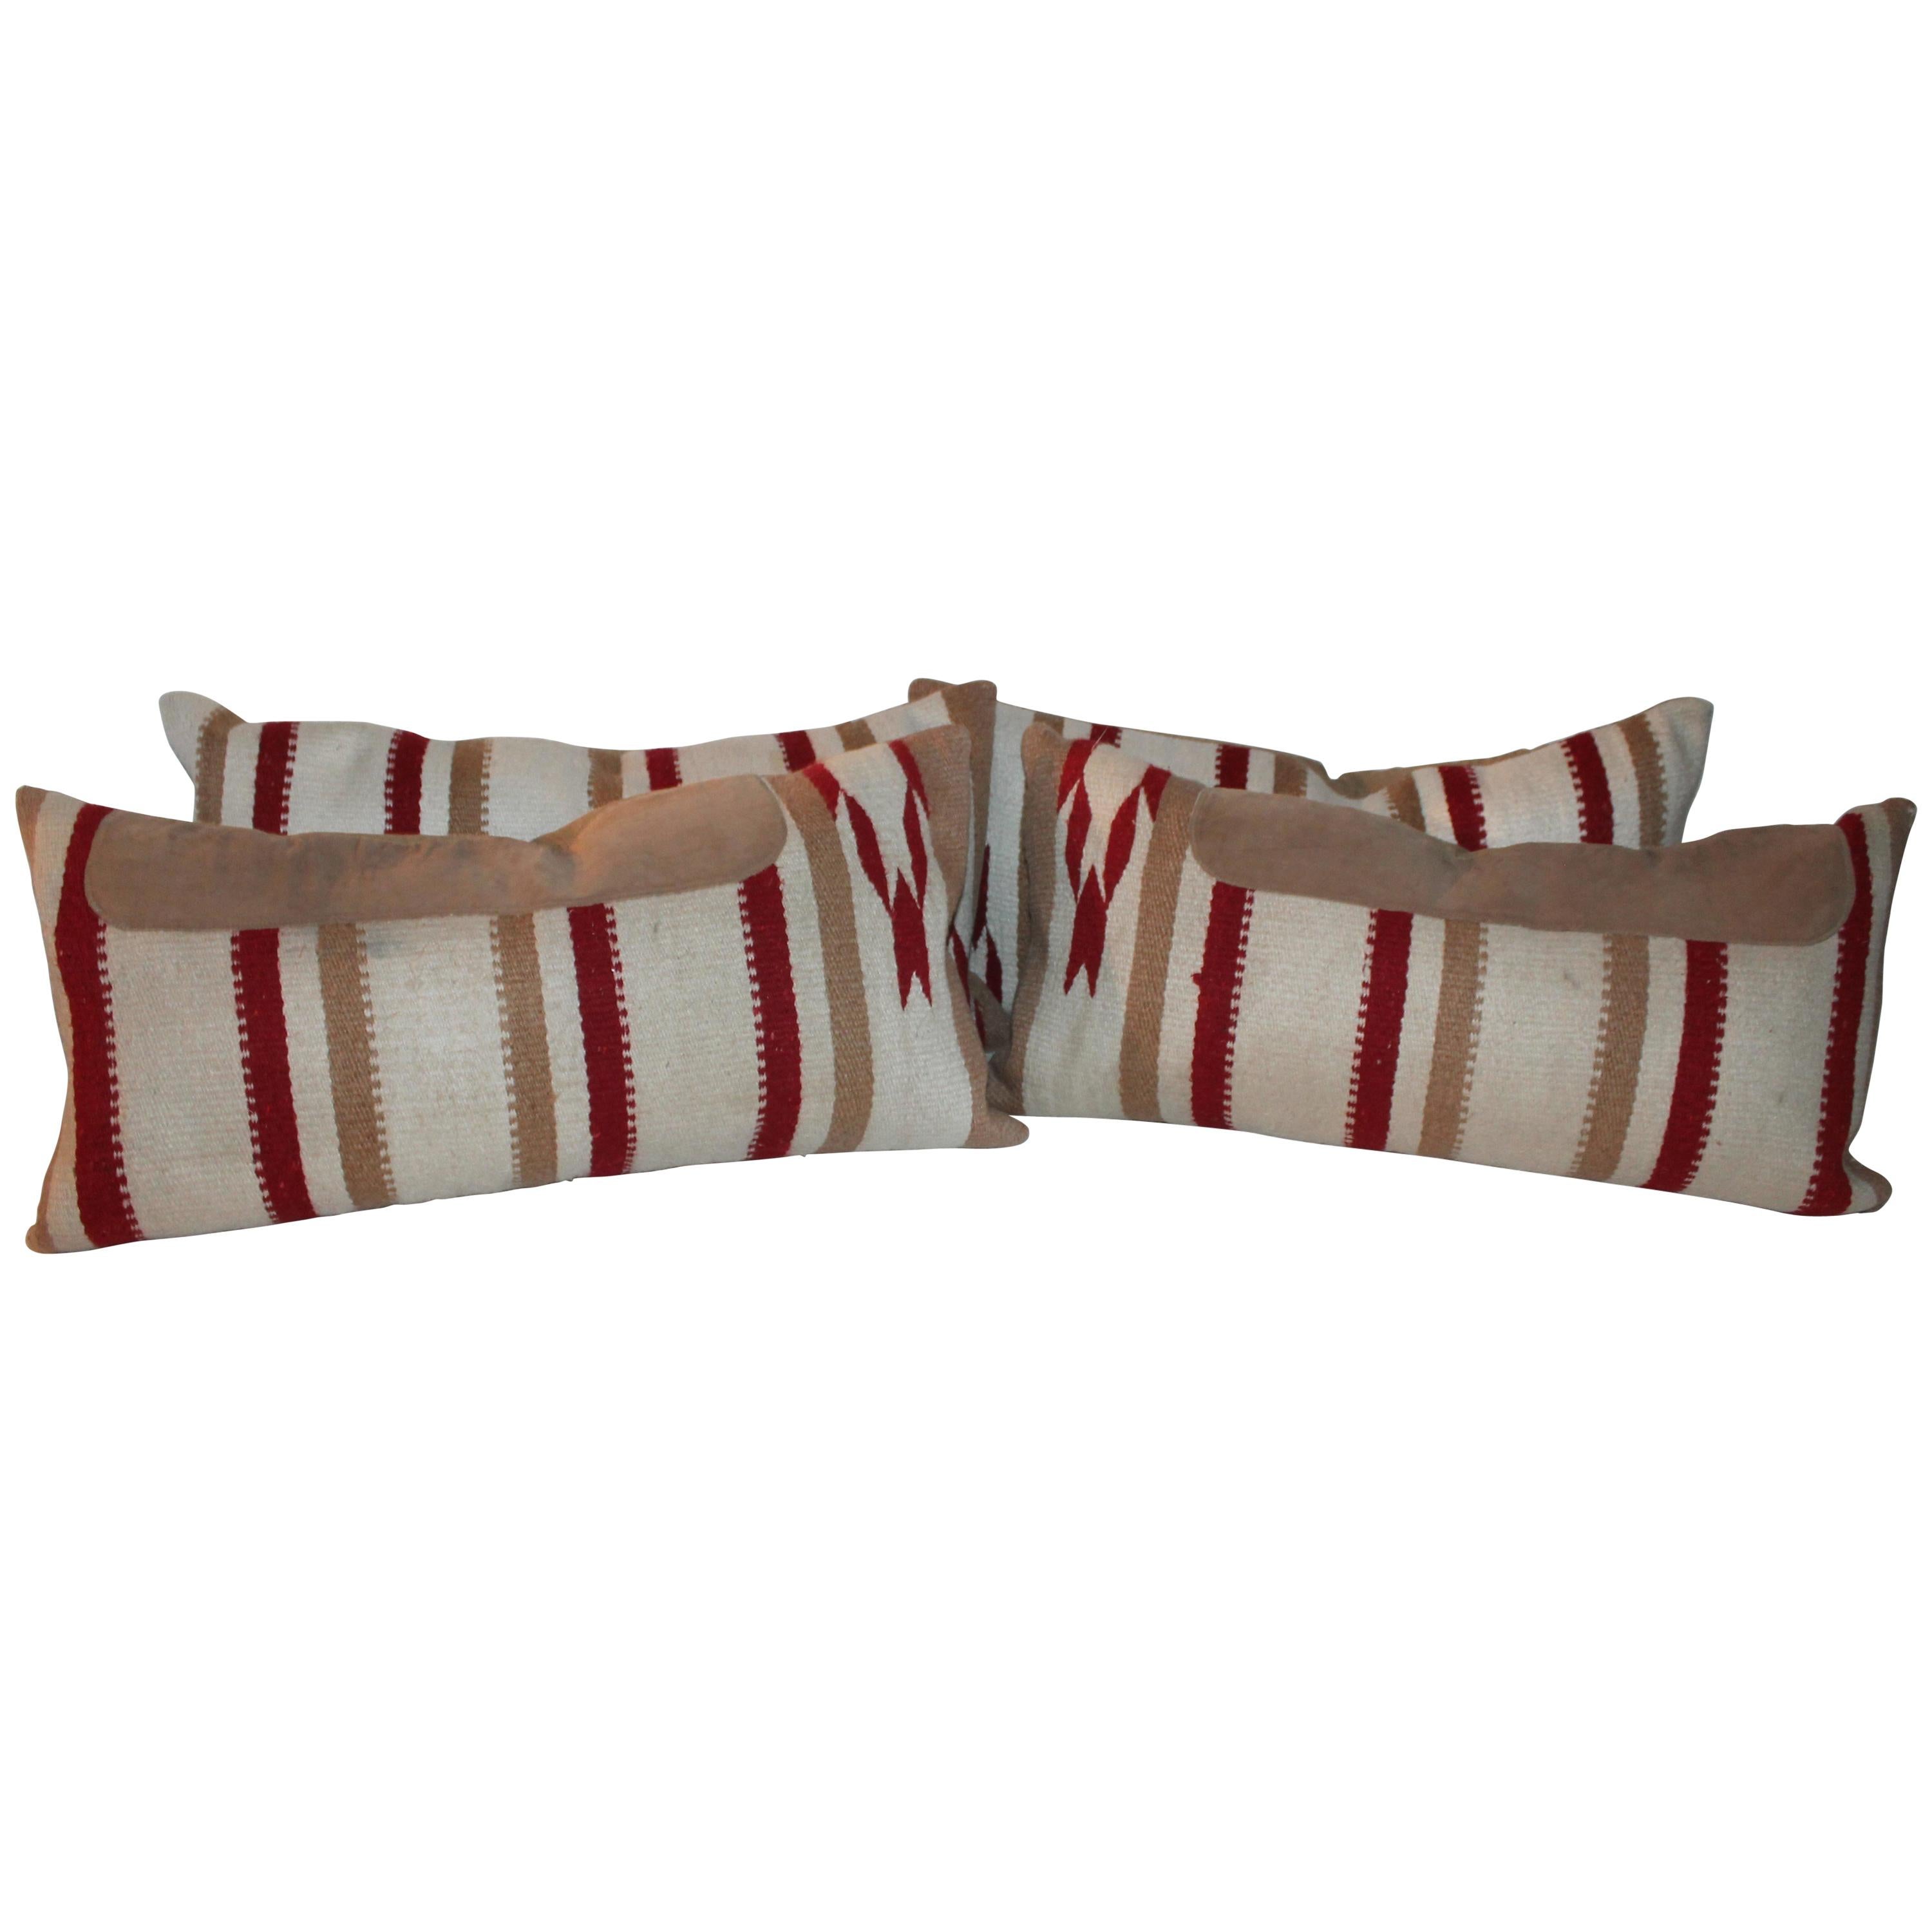 Navajo Indian Weaving / Saddle Blanket Pillows, Pair For Sale